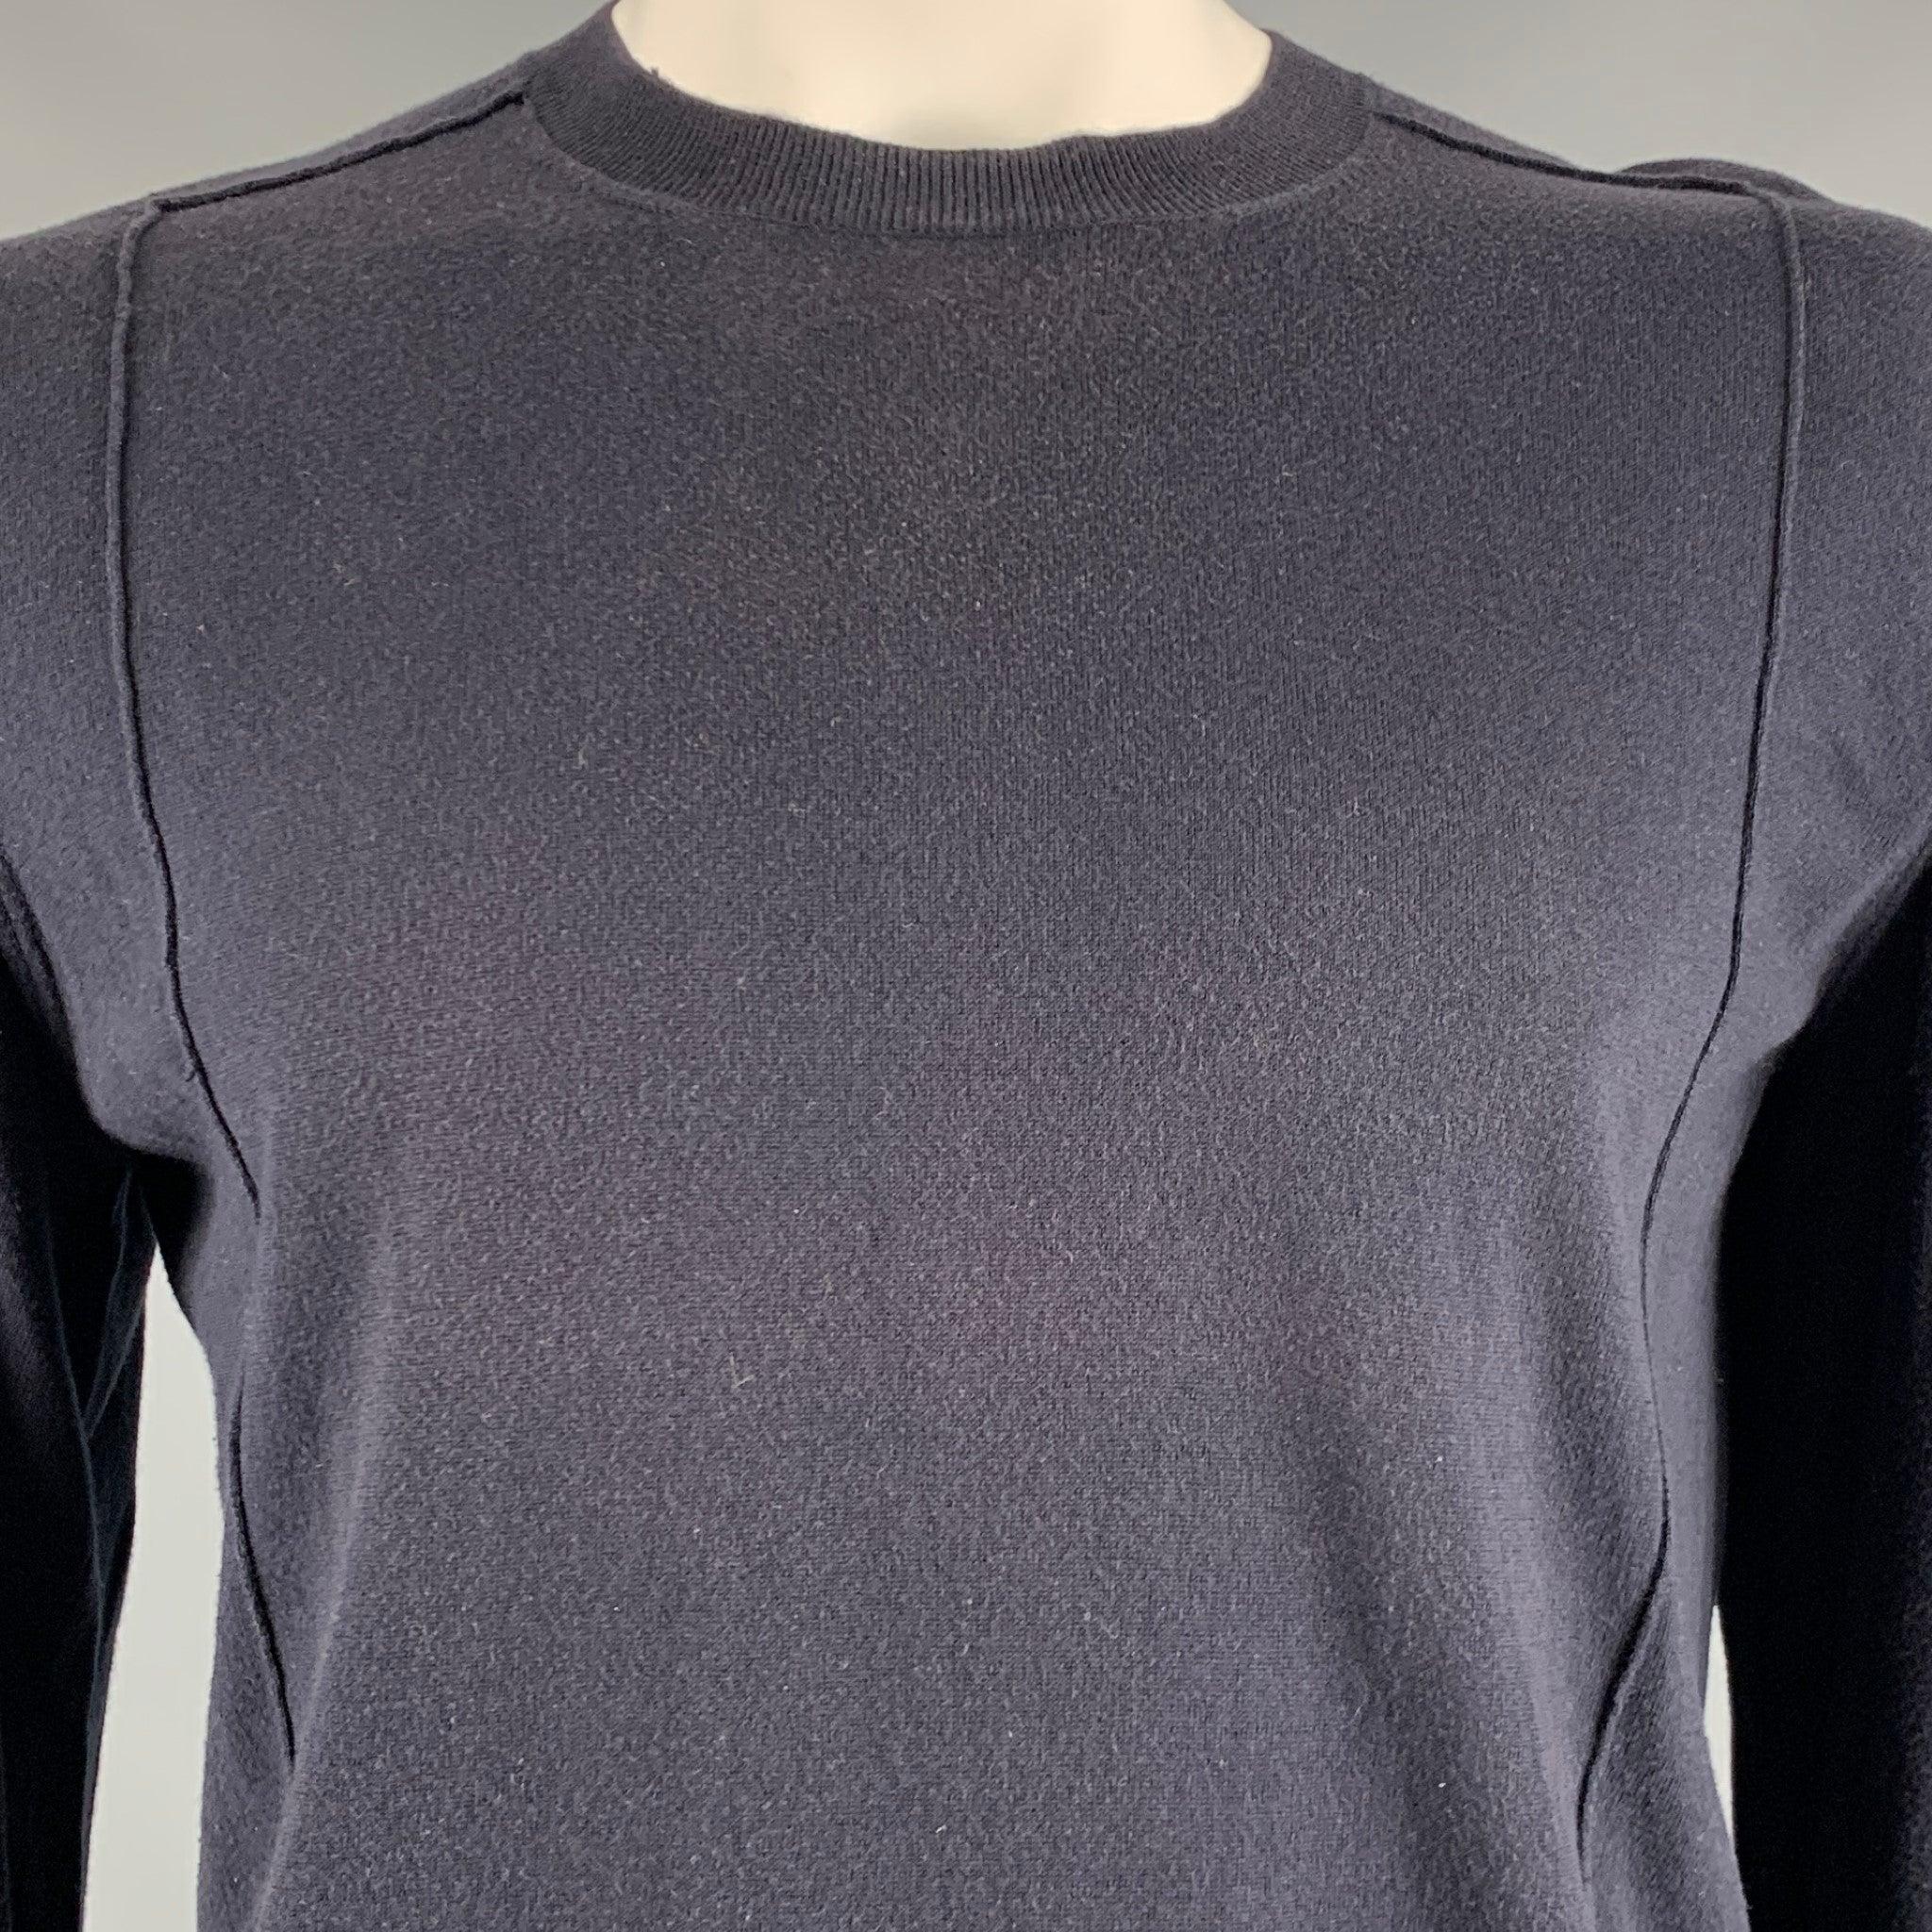 MARNI pullover
in a navy cotton fabric featuring inclined torso stitch, and a crew neck. Made in Italy.Very Good Pre-Owned Condition. Moderate signs of wear. 

Marked:   52 

Measurements: 
 
Shoulder: 16.5 inches Chest: 46 inches Sleeve: 27 inches